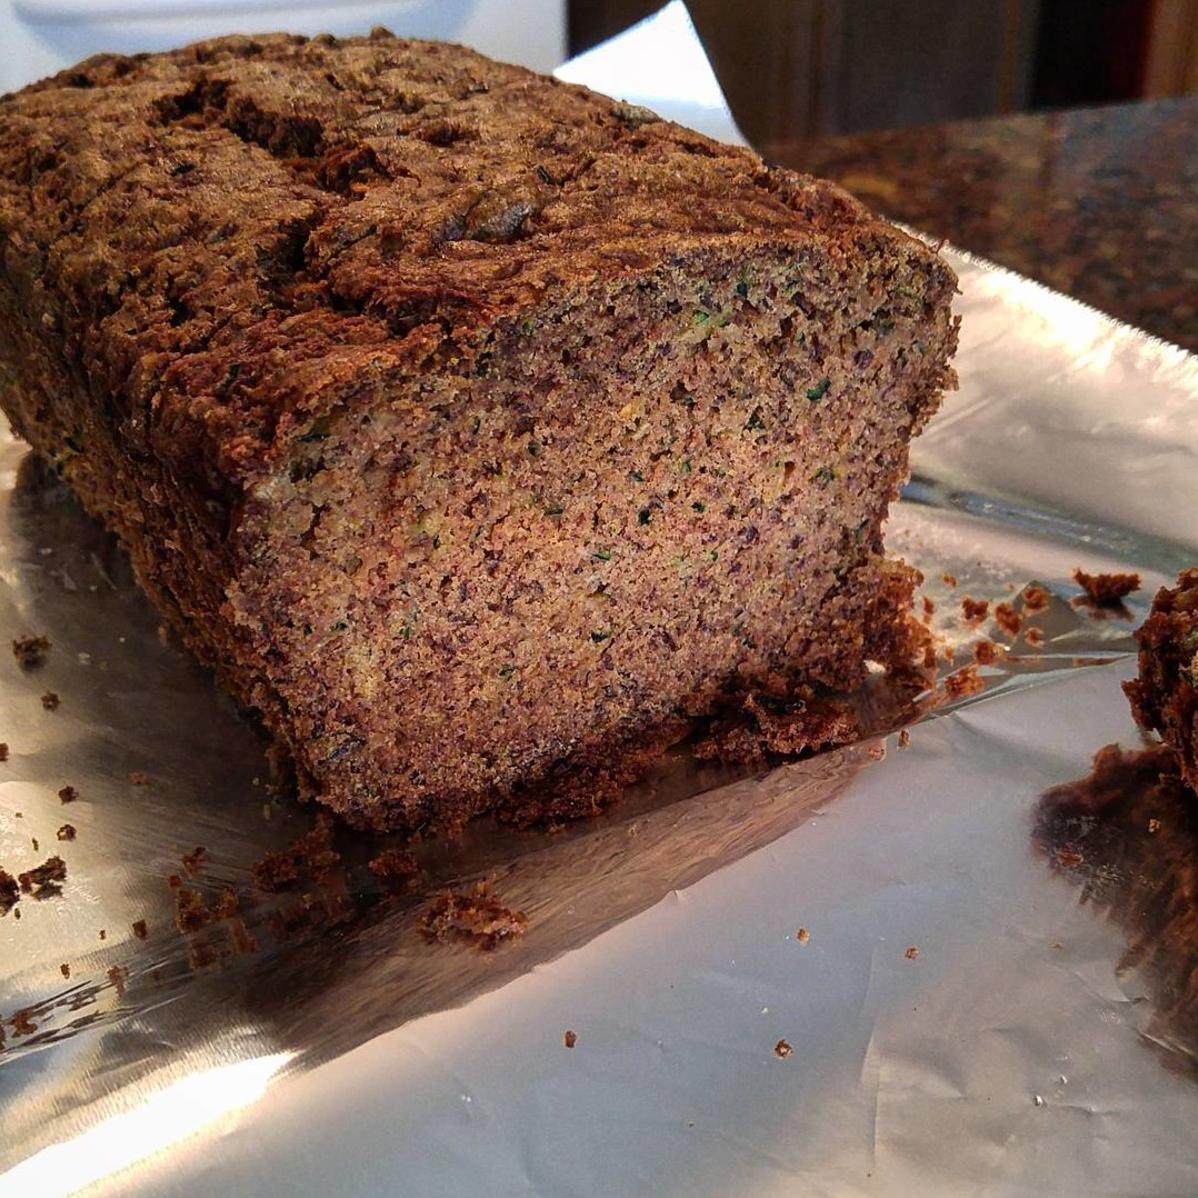  Enjoy the wholesome goodness of our gluten-free millet zucchini bread.